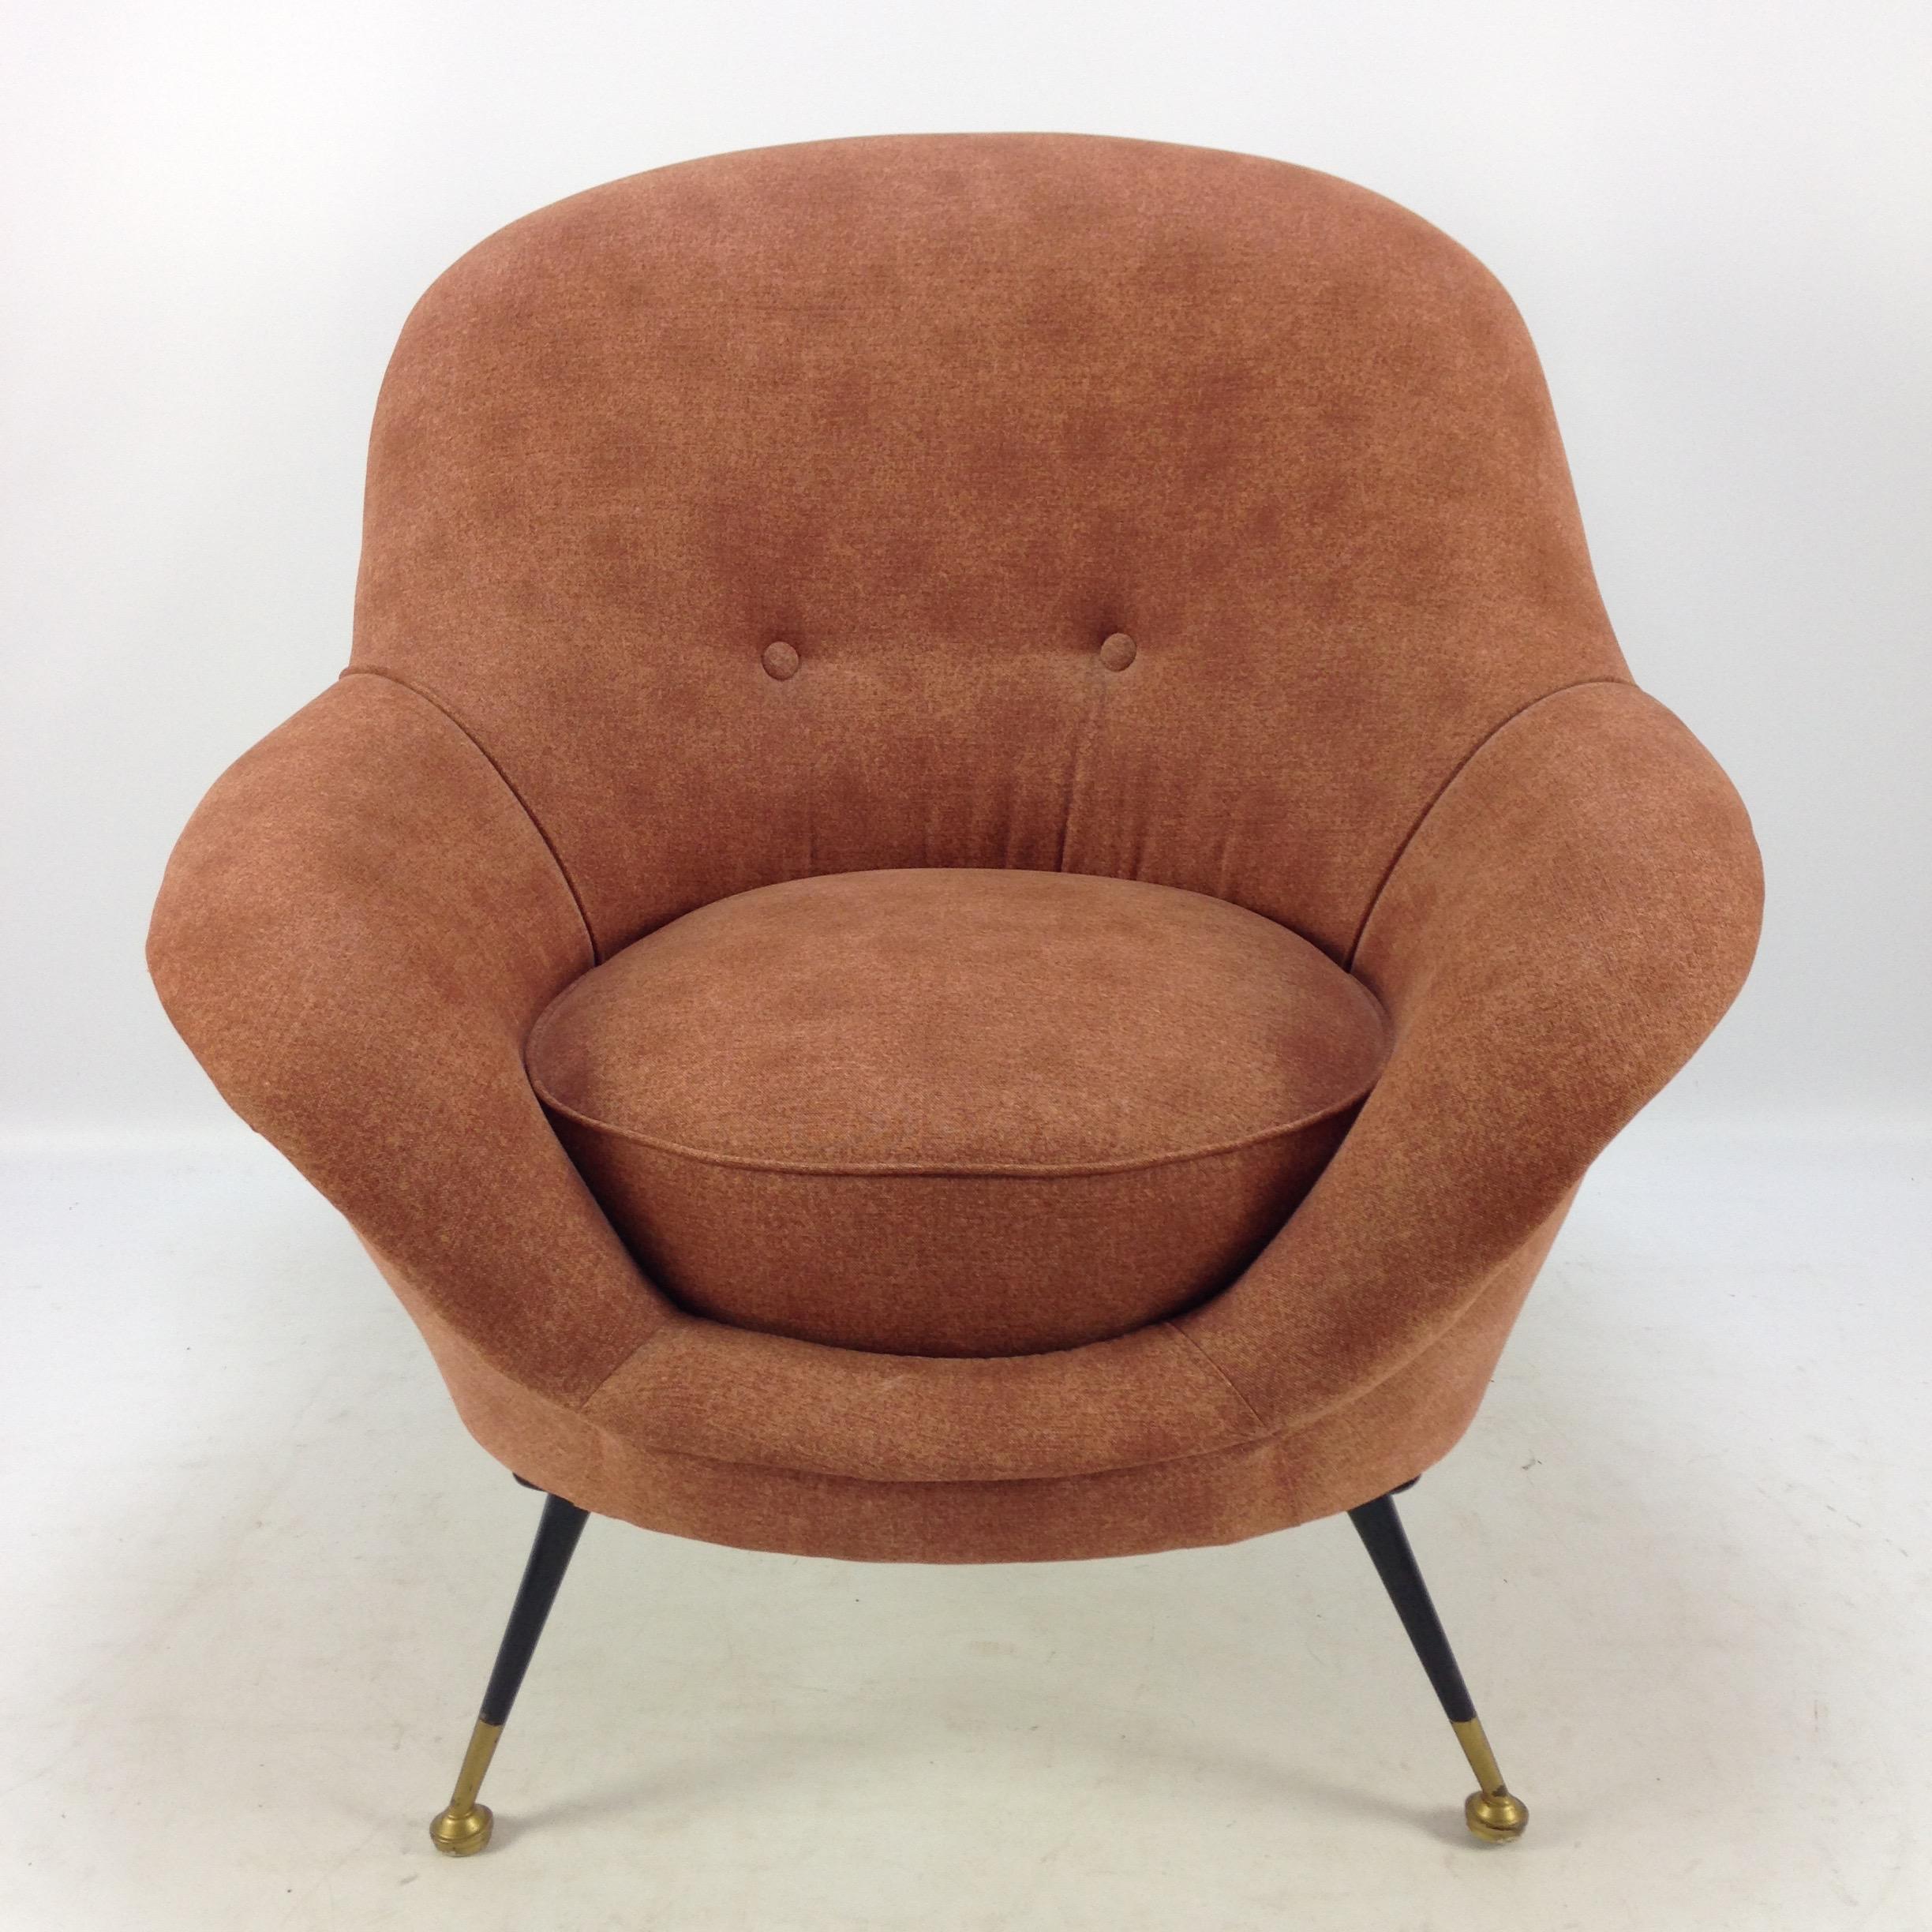 Very nice pair of Italian armchairs, fabricated in the 50's.

Comfortable seat and elegant design mixed together. 

Upholstered with beautiful fabric. 

The chairs are in very good condition.